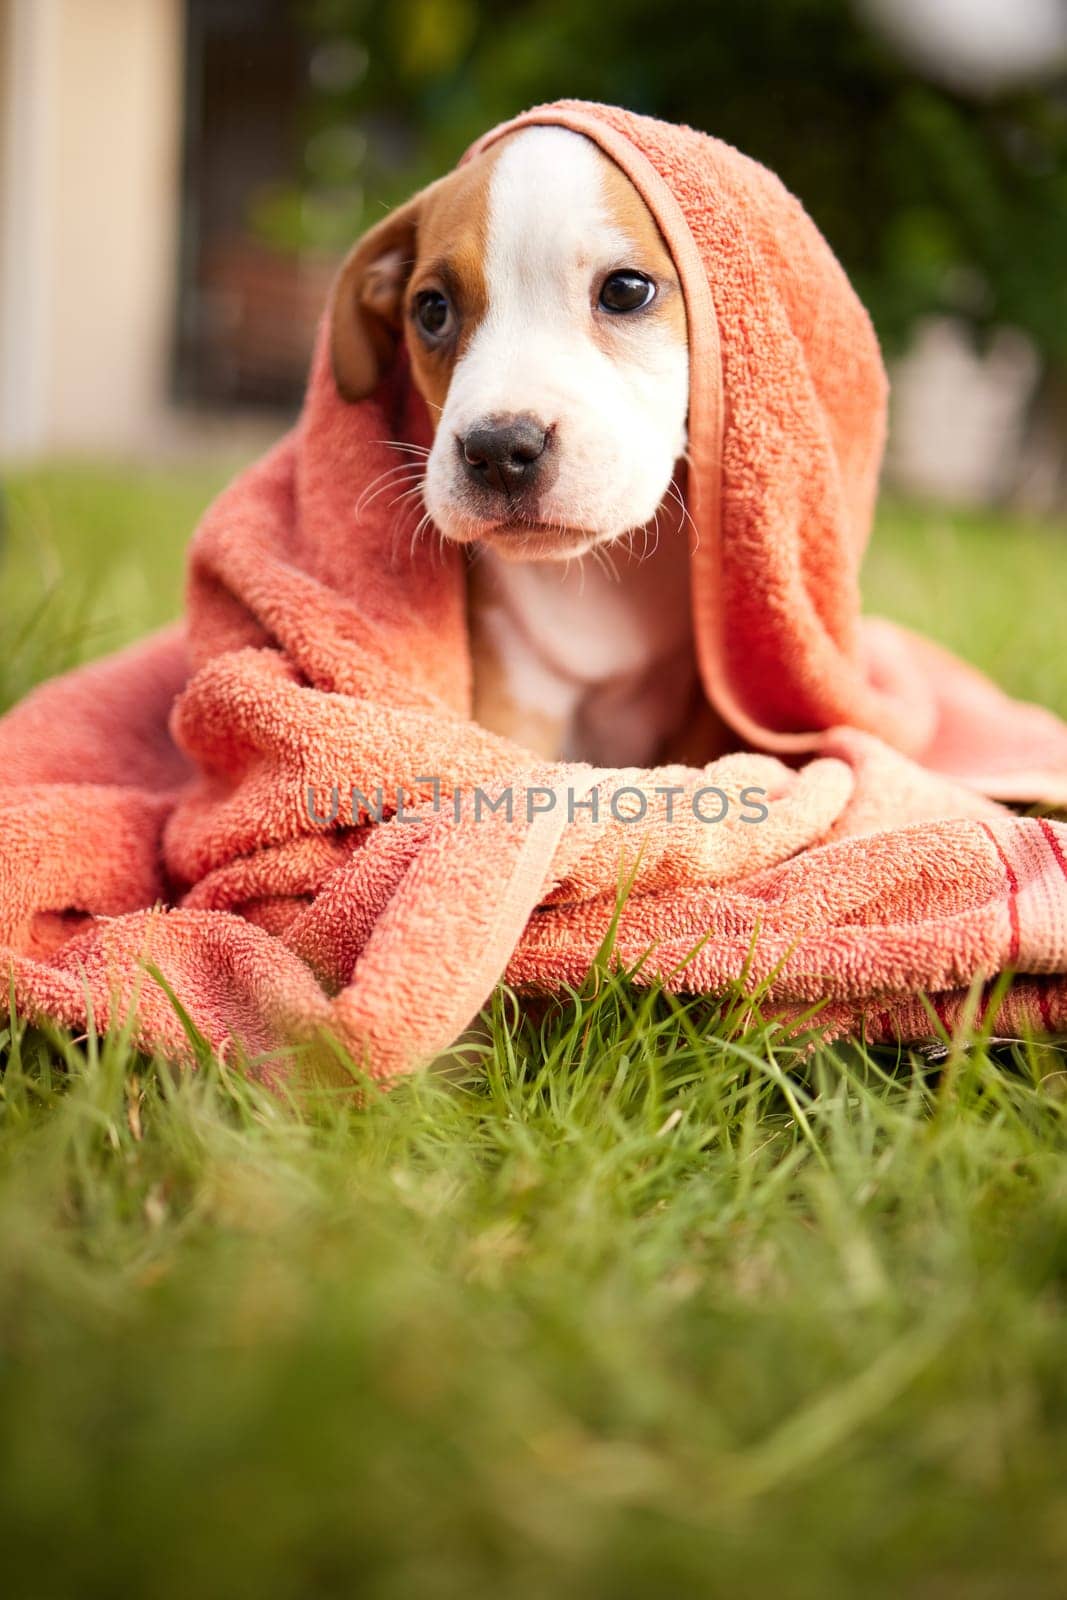 Grass, dog and puppy in backyard with towel for adoption, rescue shelter and animal care. Cute, pets and adorable pitbull outdoors for washing, cleaning and relax in environment, lawn and nature by YuriArcurs